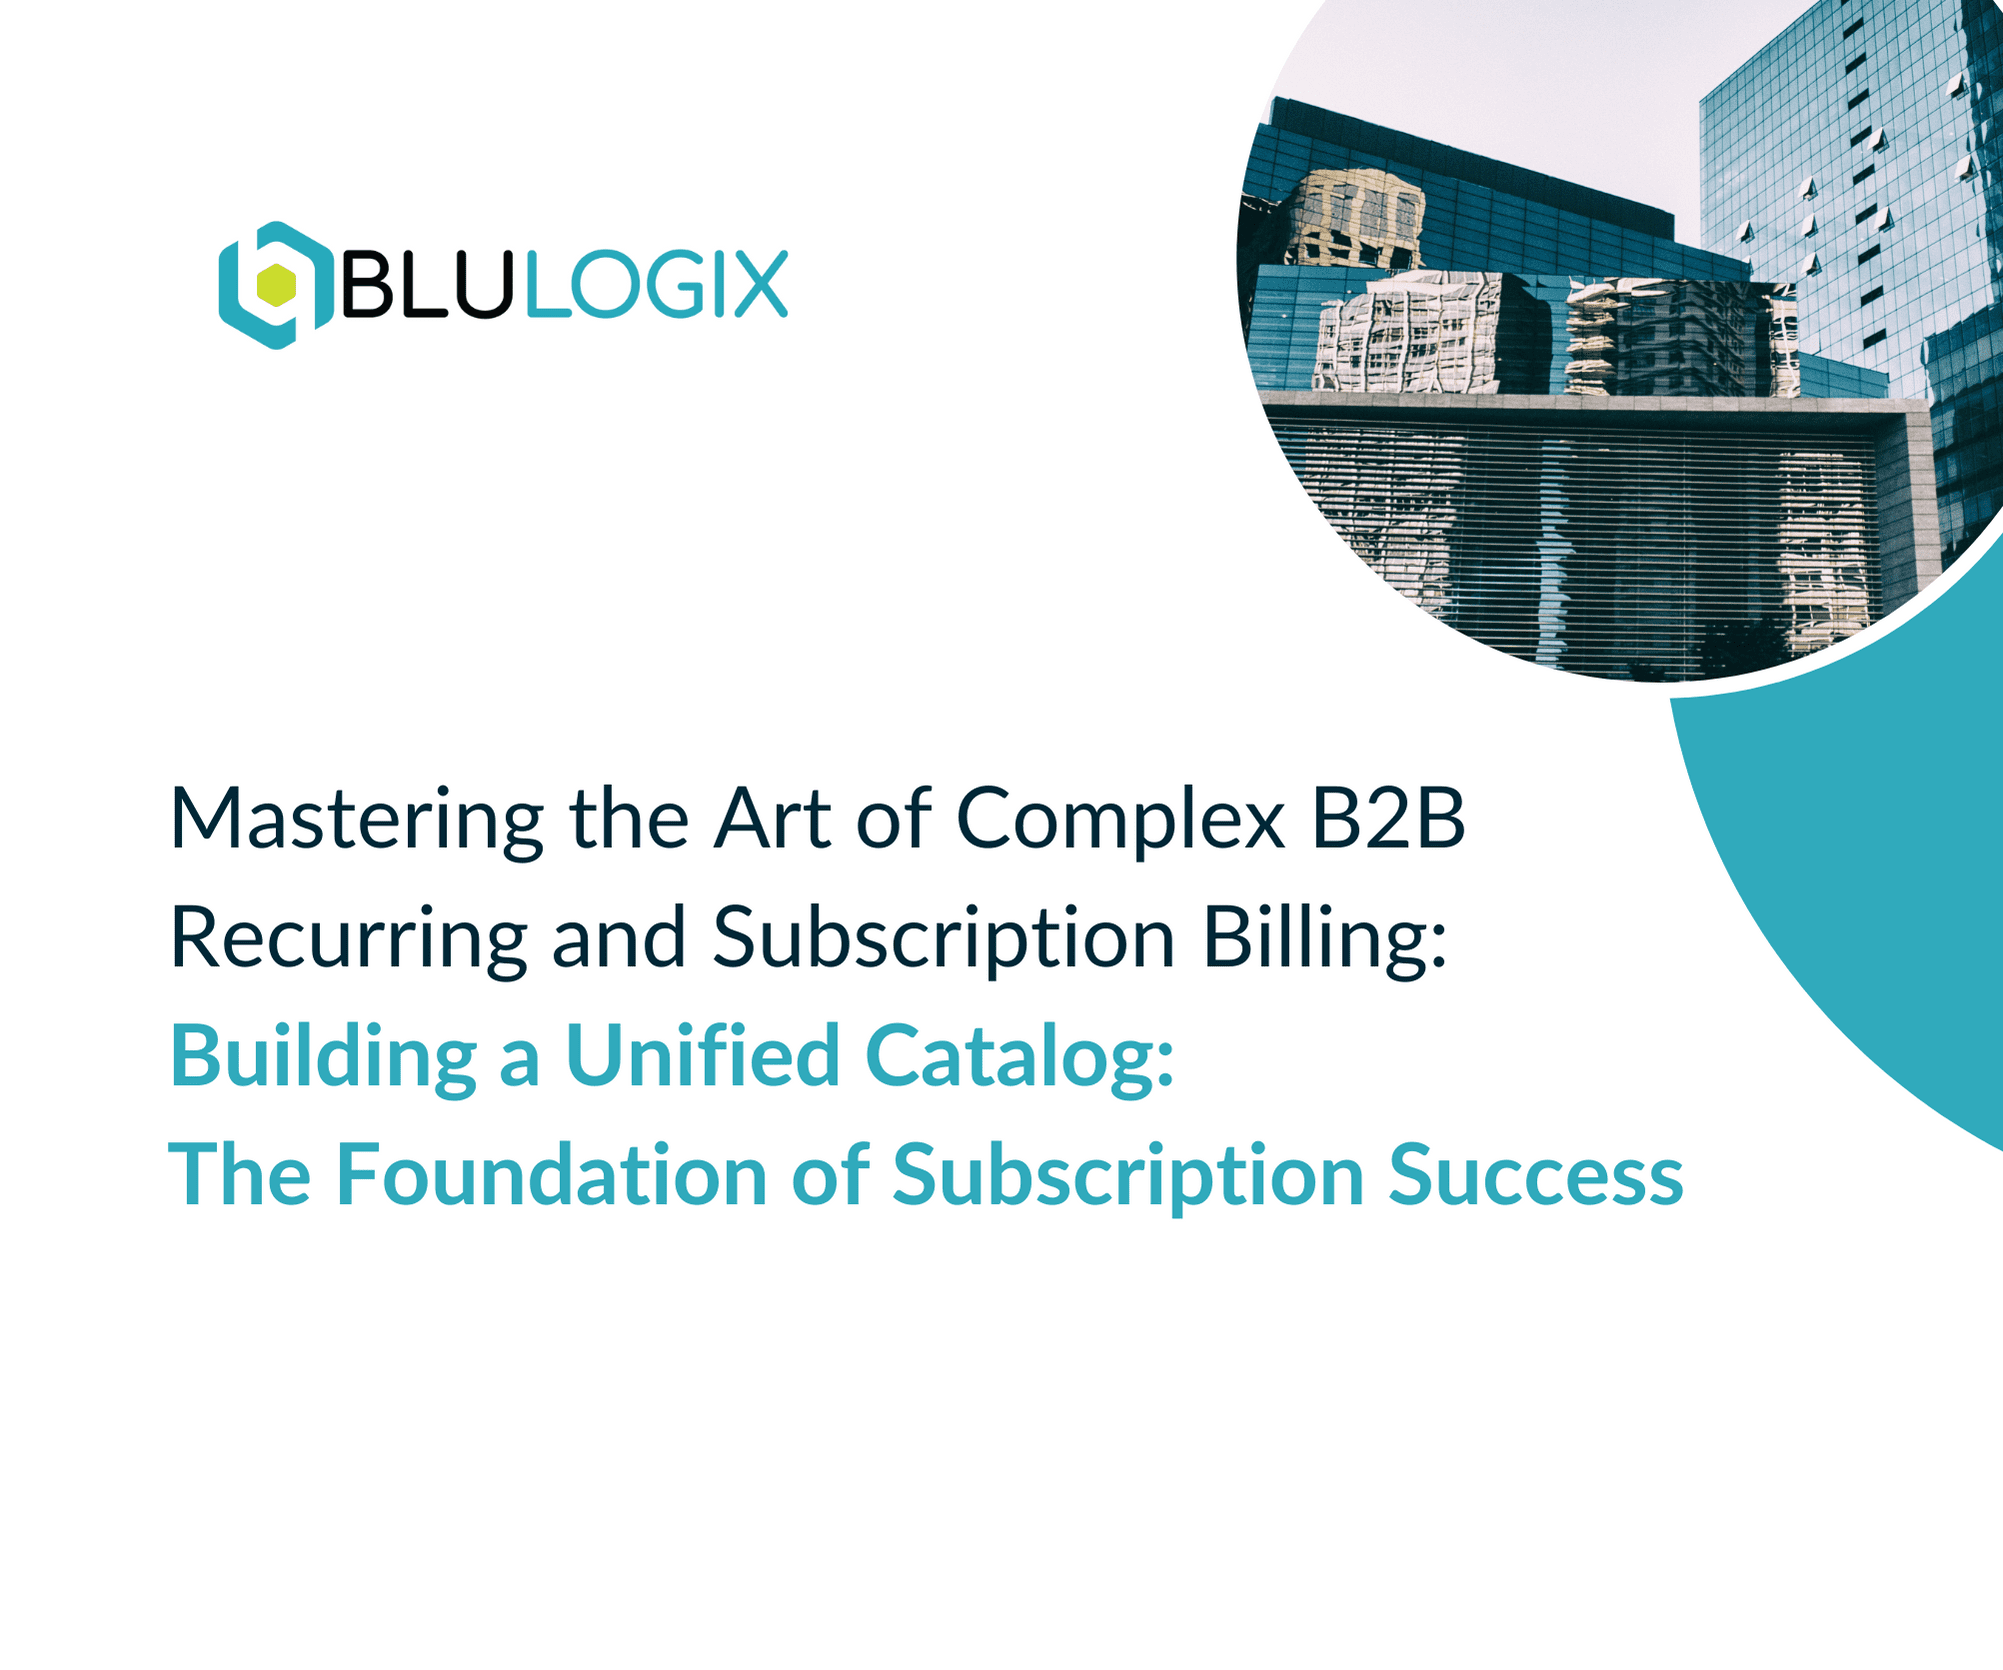 Building a Unified Catalog The Foundation of Subscription Success